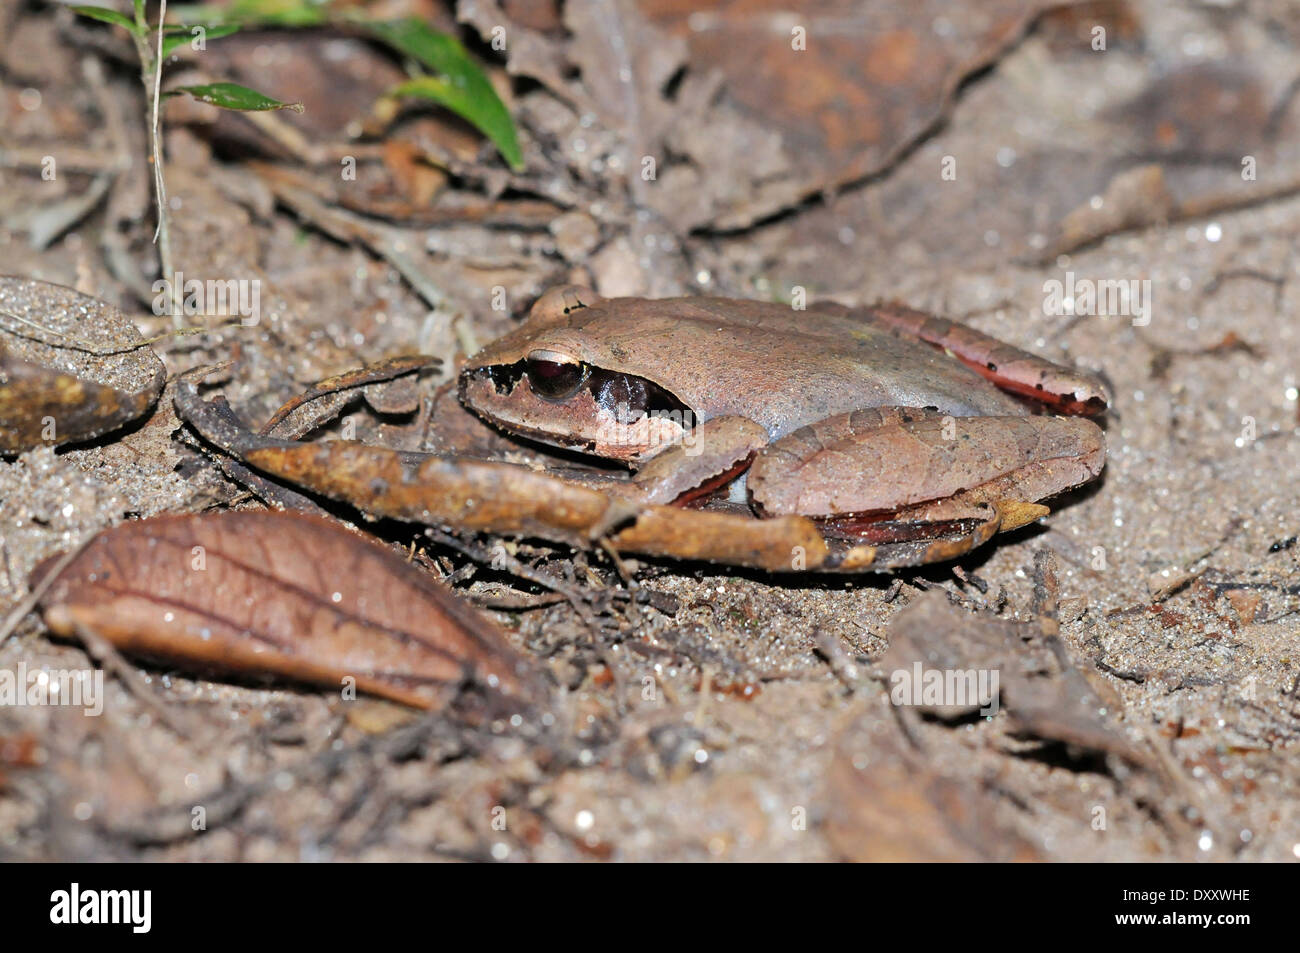 Madagascar jumping frog (Aglyptodactylus madagascariensis). The English name is shared with several similar species. Stock Photo